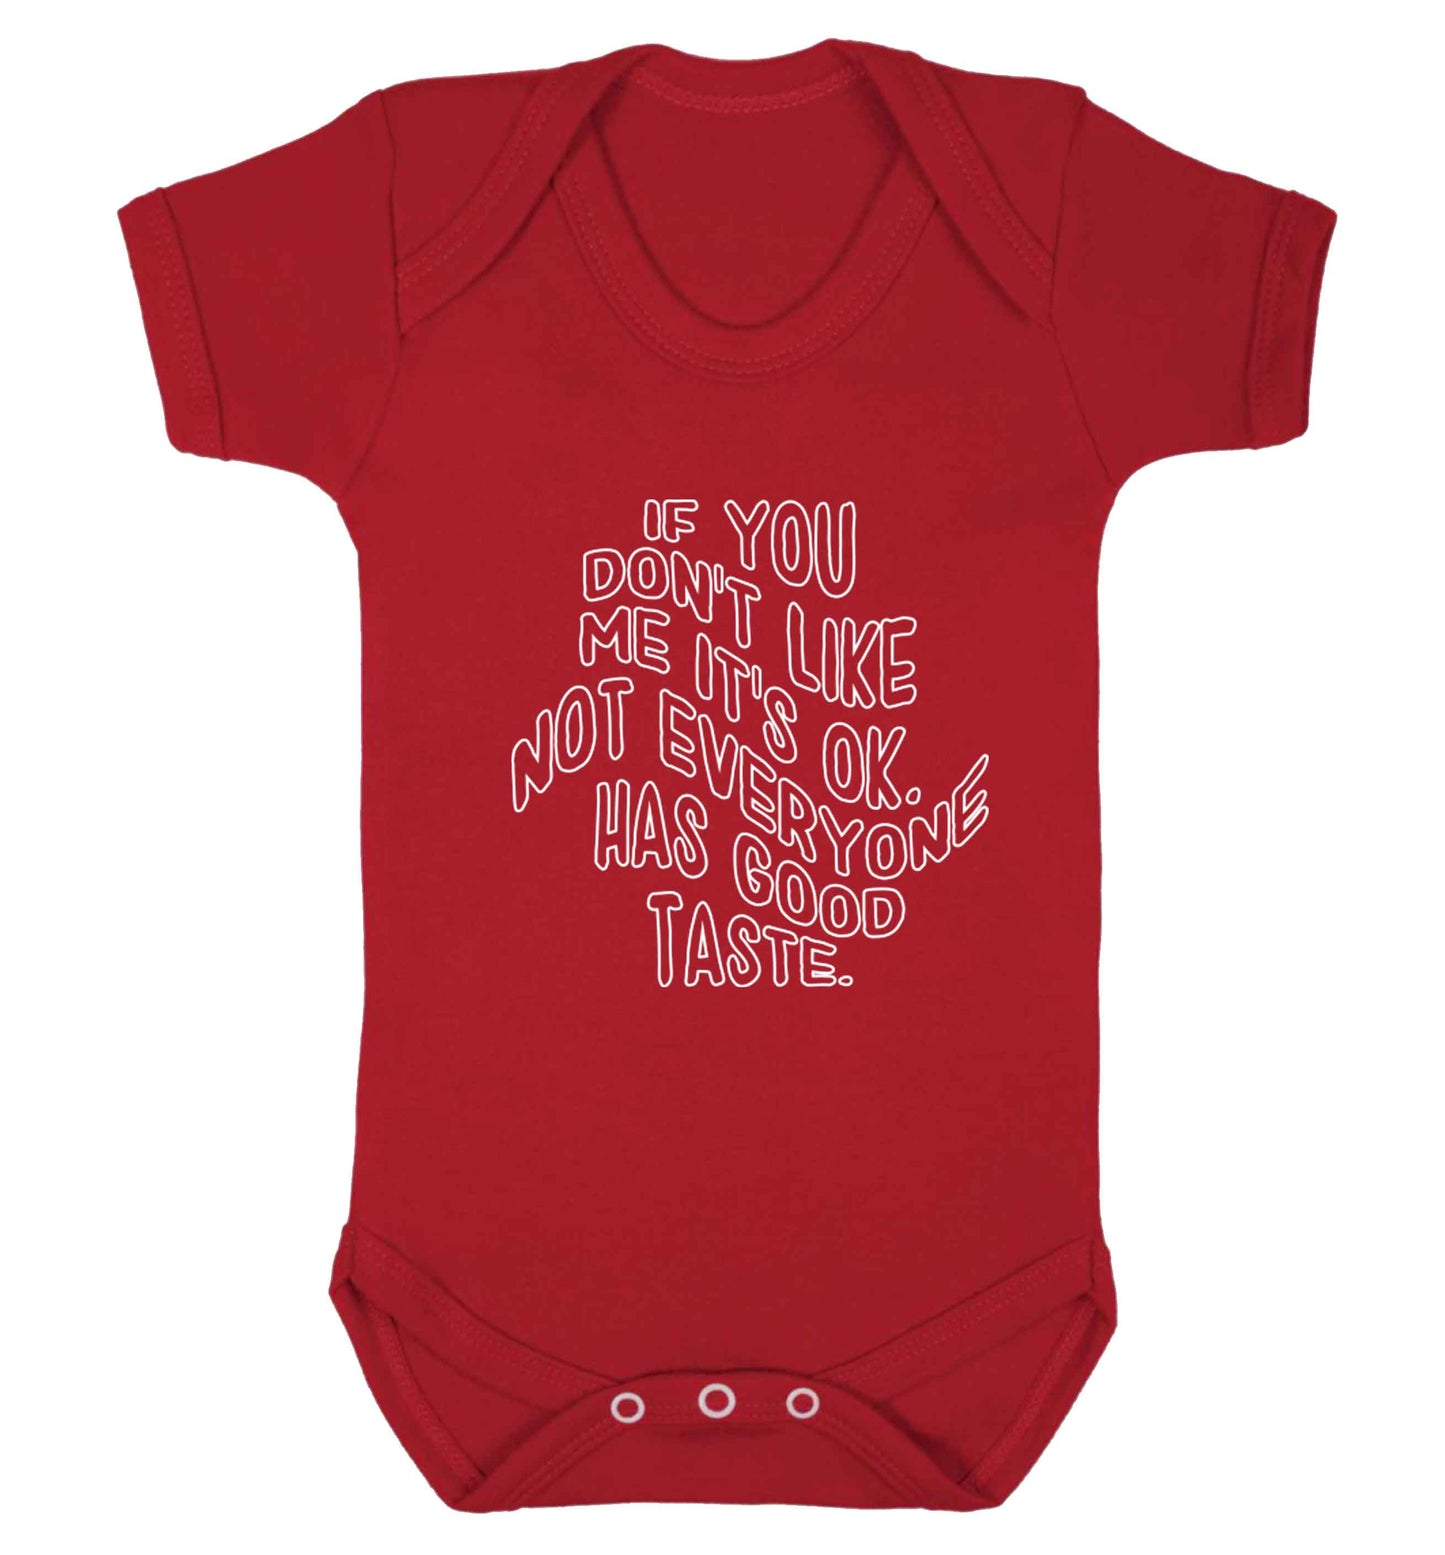 If you don't like me it's ok not everyone has good taste baby vest red 18-24 months